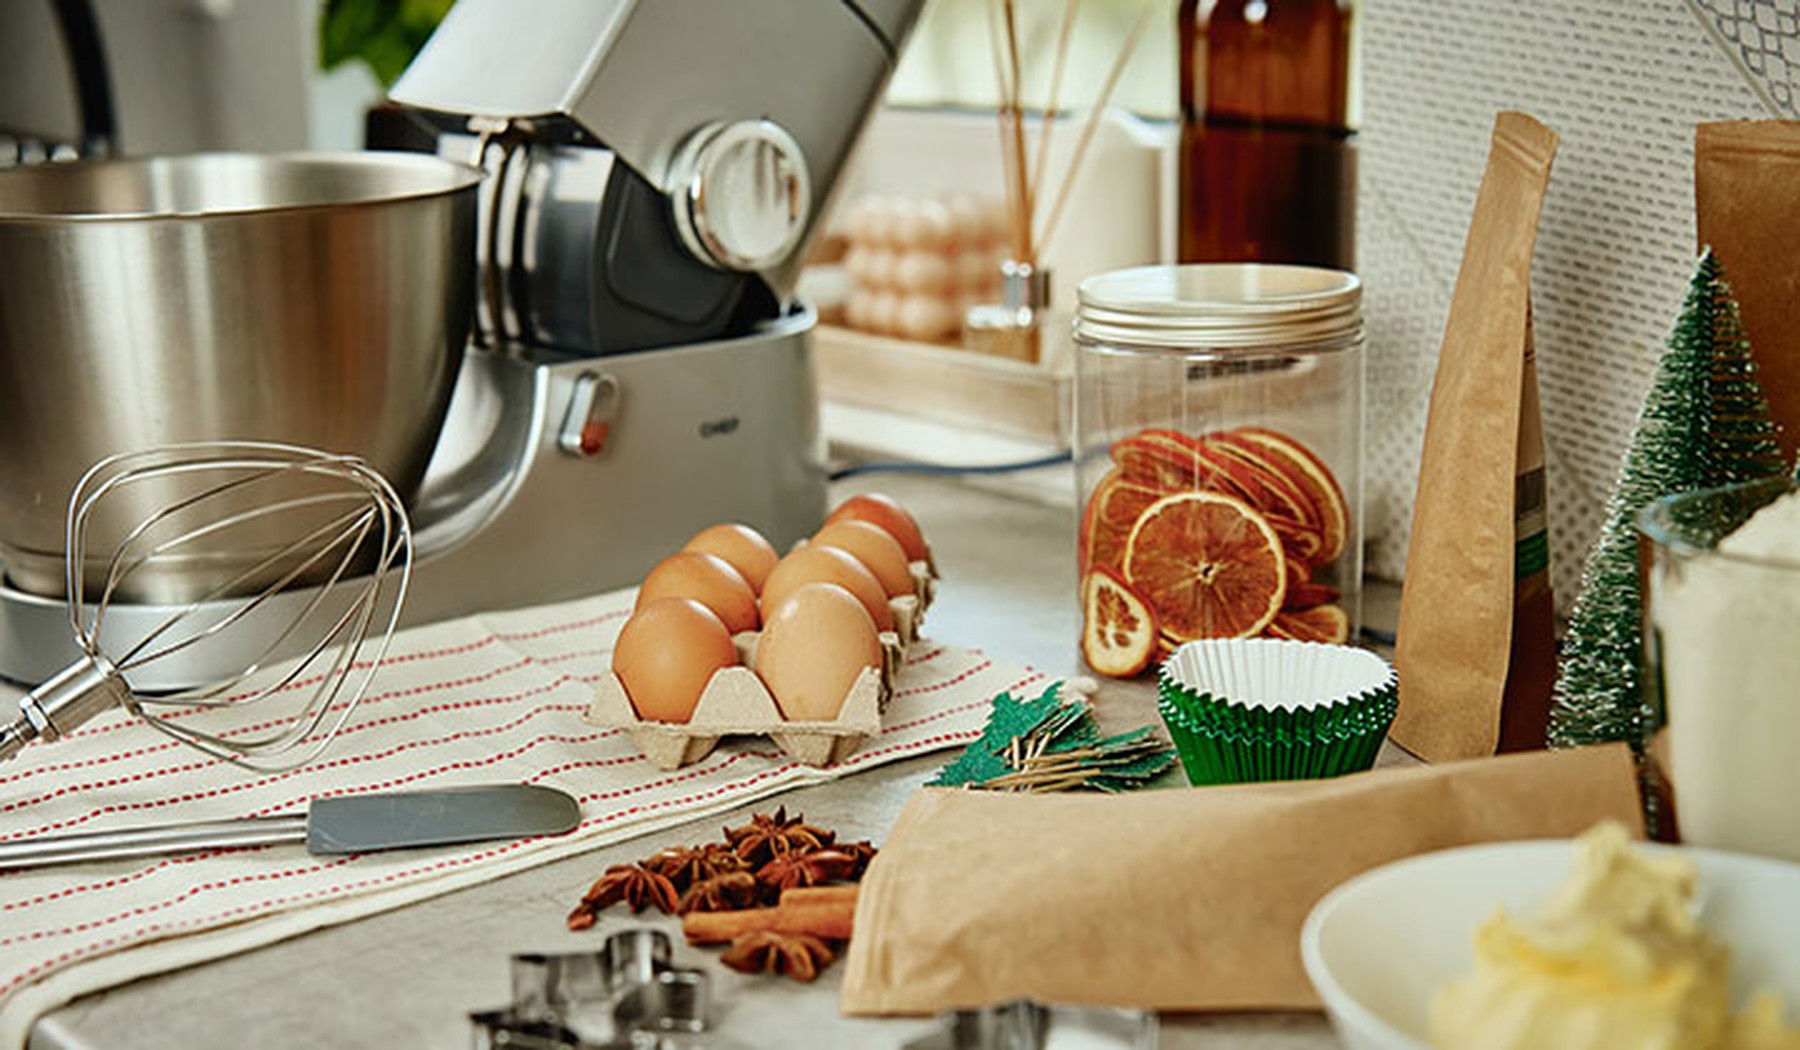 Stand mixer and baking supplies